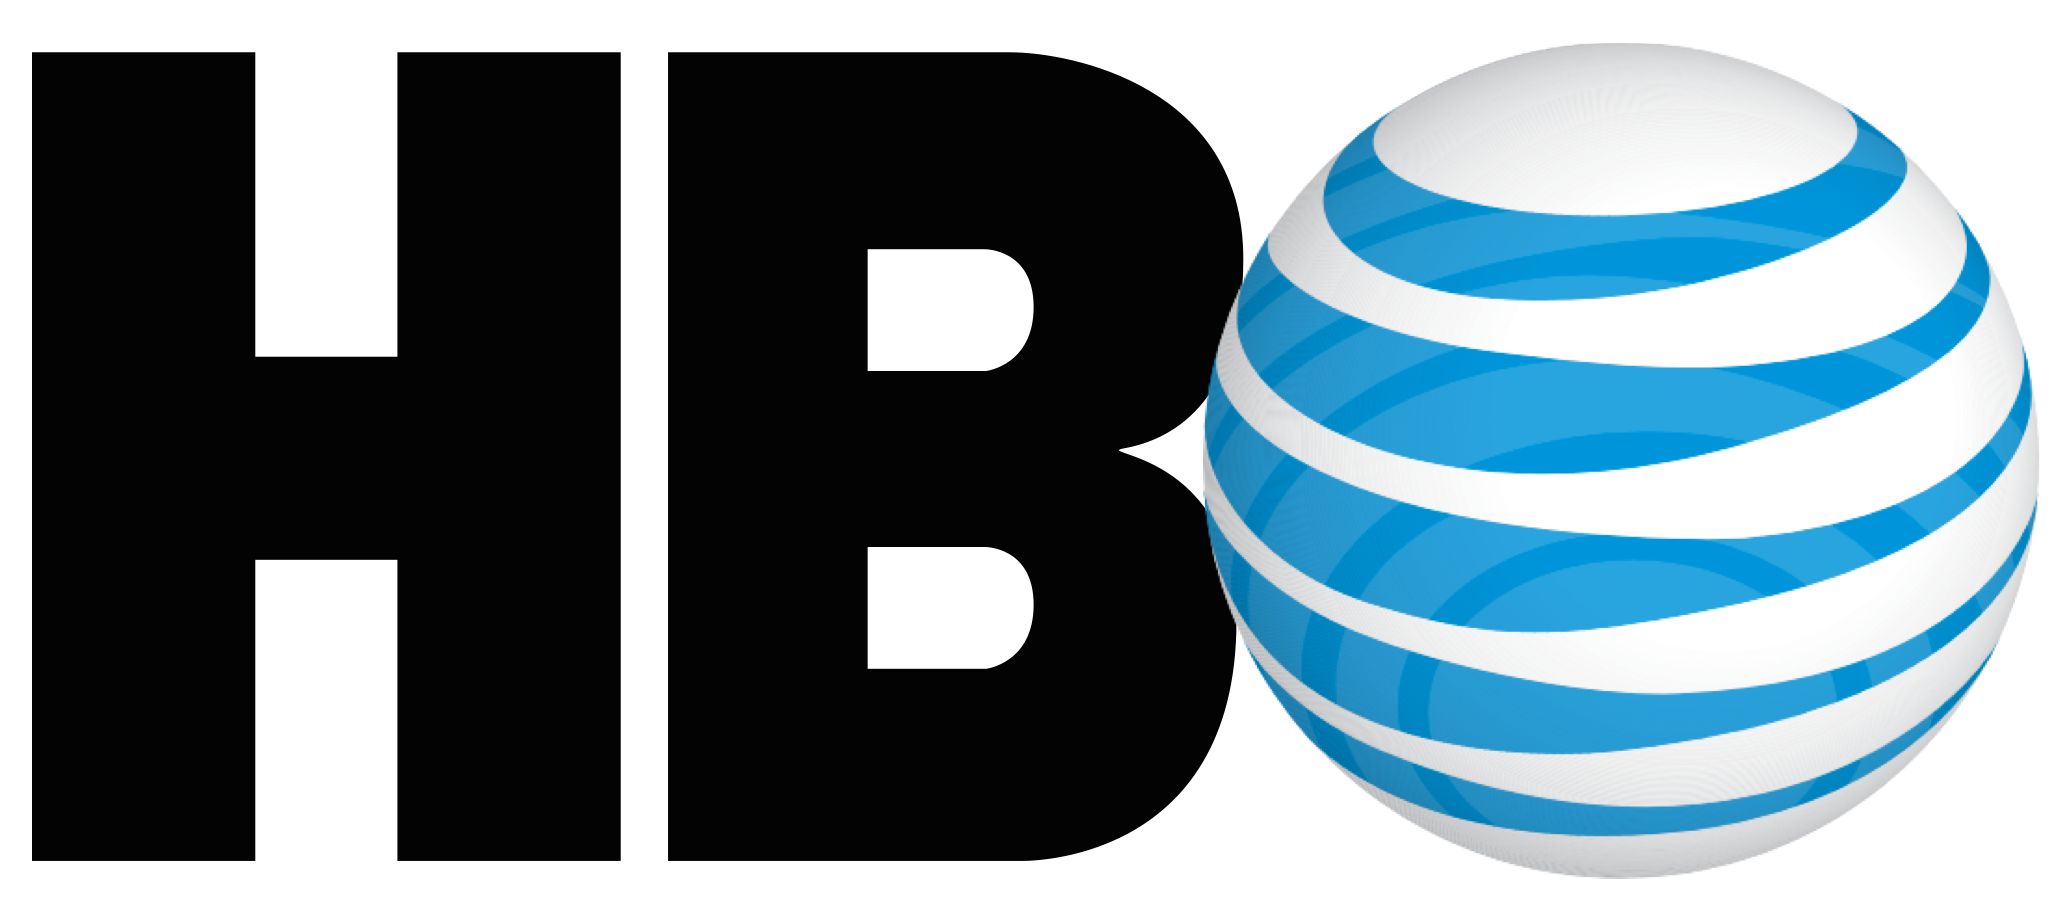 AT&T: It’s Fine For Us To Buy Time Warner Because We’re Too Small To Hurt Competition